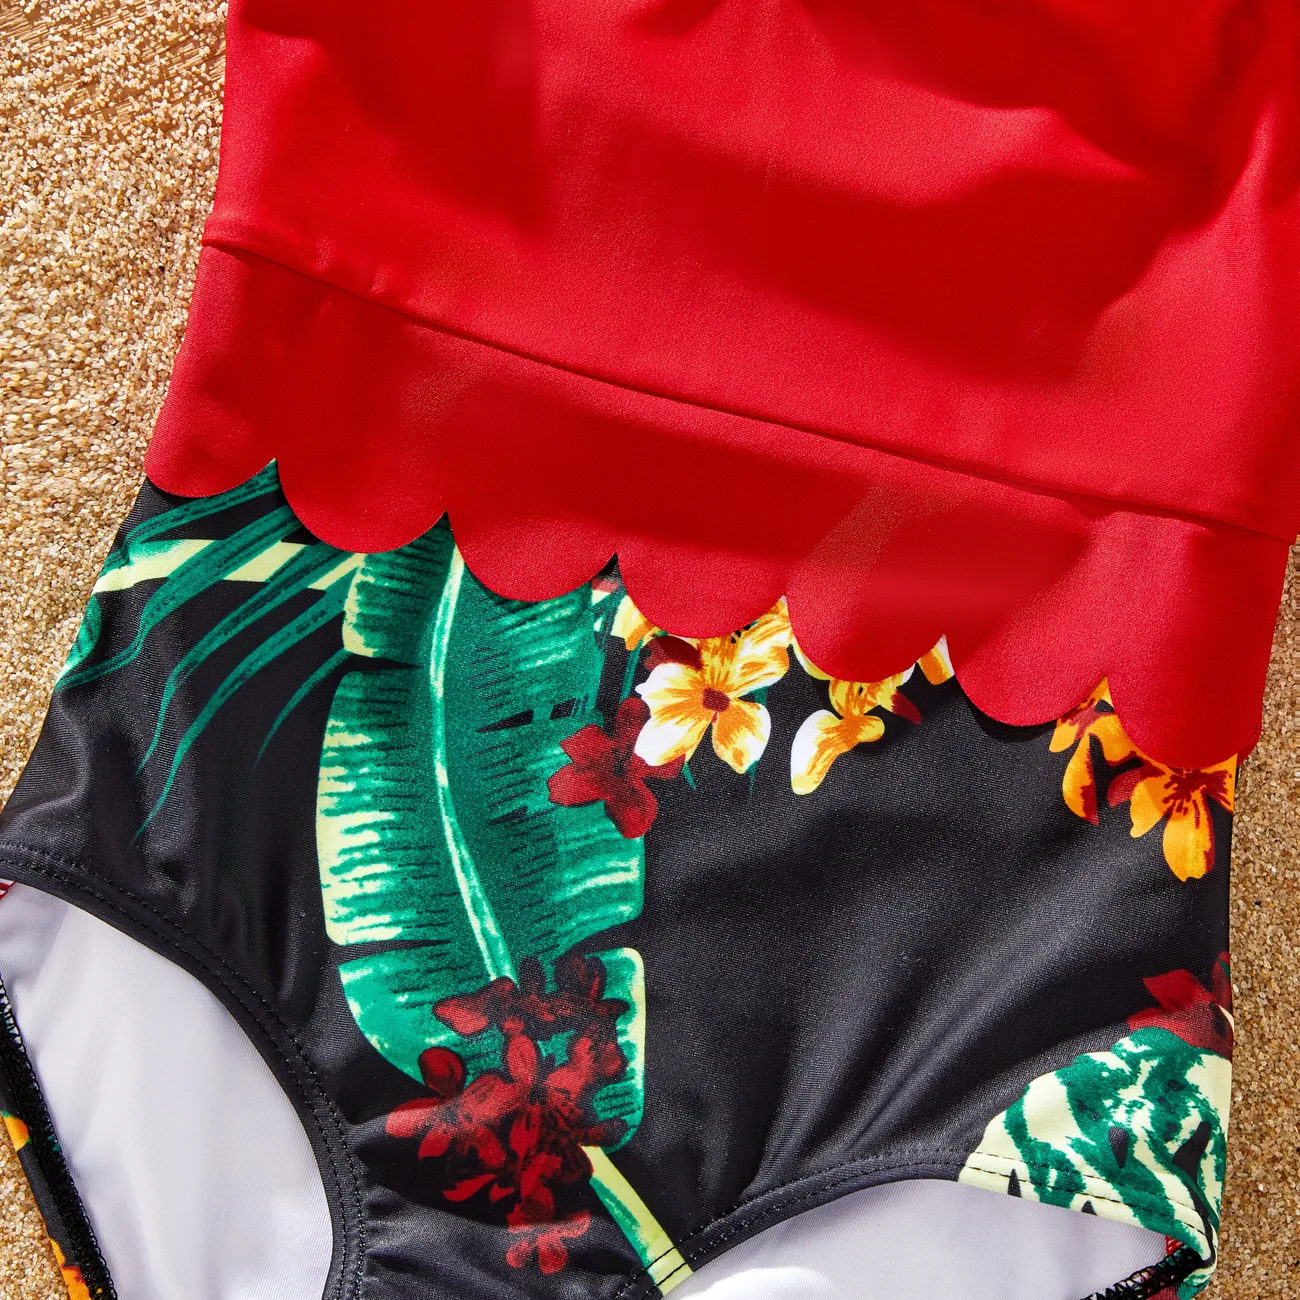 Family Matching Floral Drawstring Swim Trunks or Red Halter Top Spliced Swimsuit Red big image 1